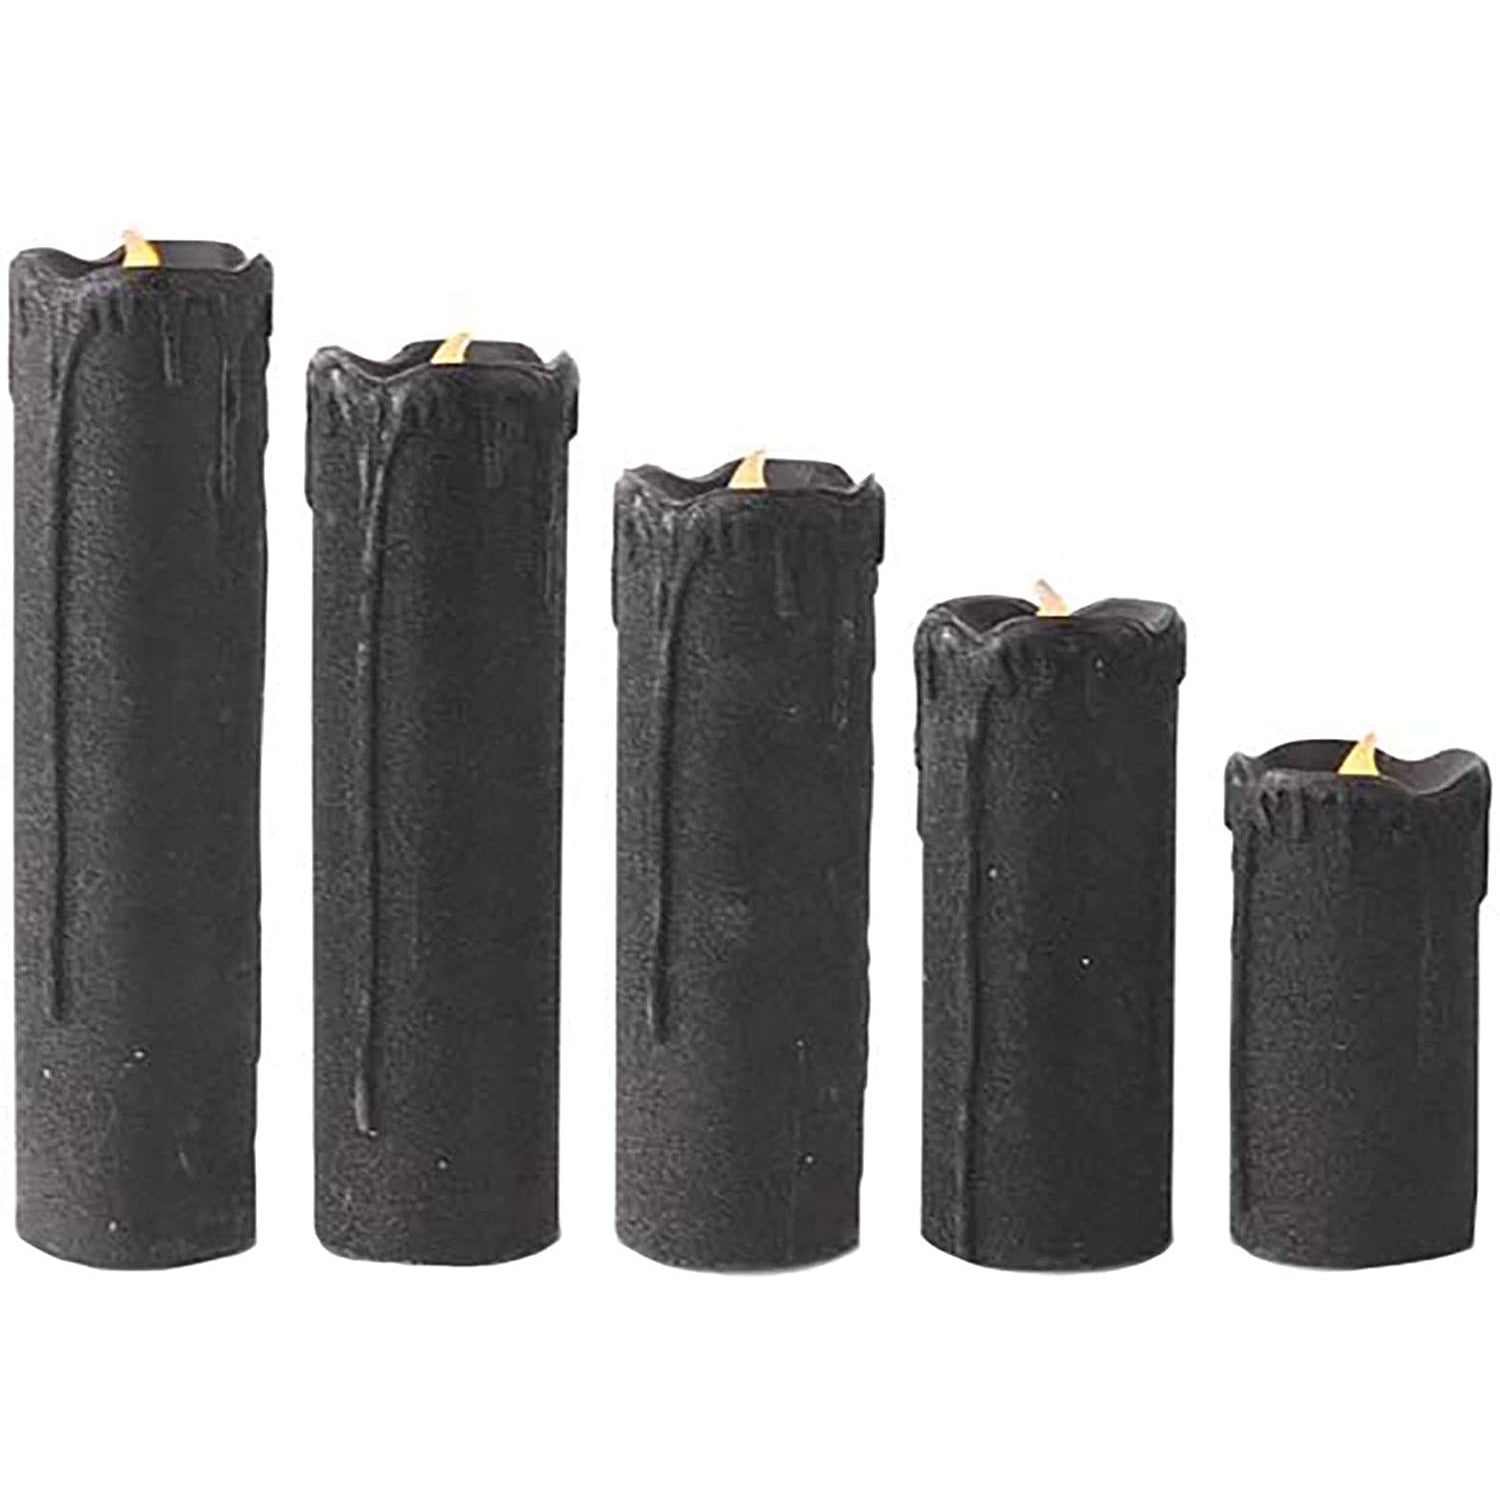 Set of 5 Black Glitter Resin LED Candles w/ Timers - Zinnias Gift Boutique